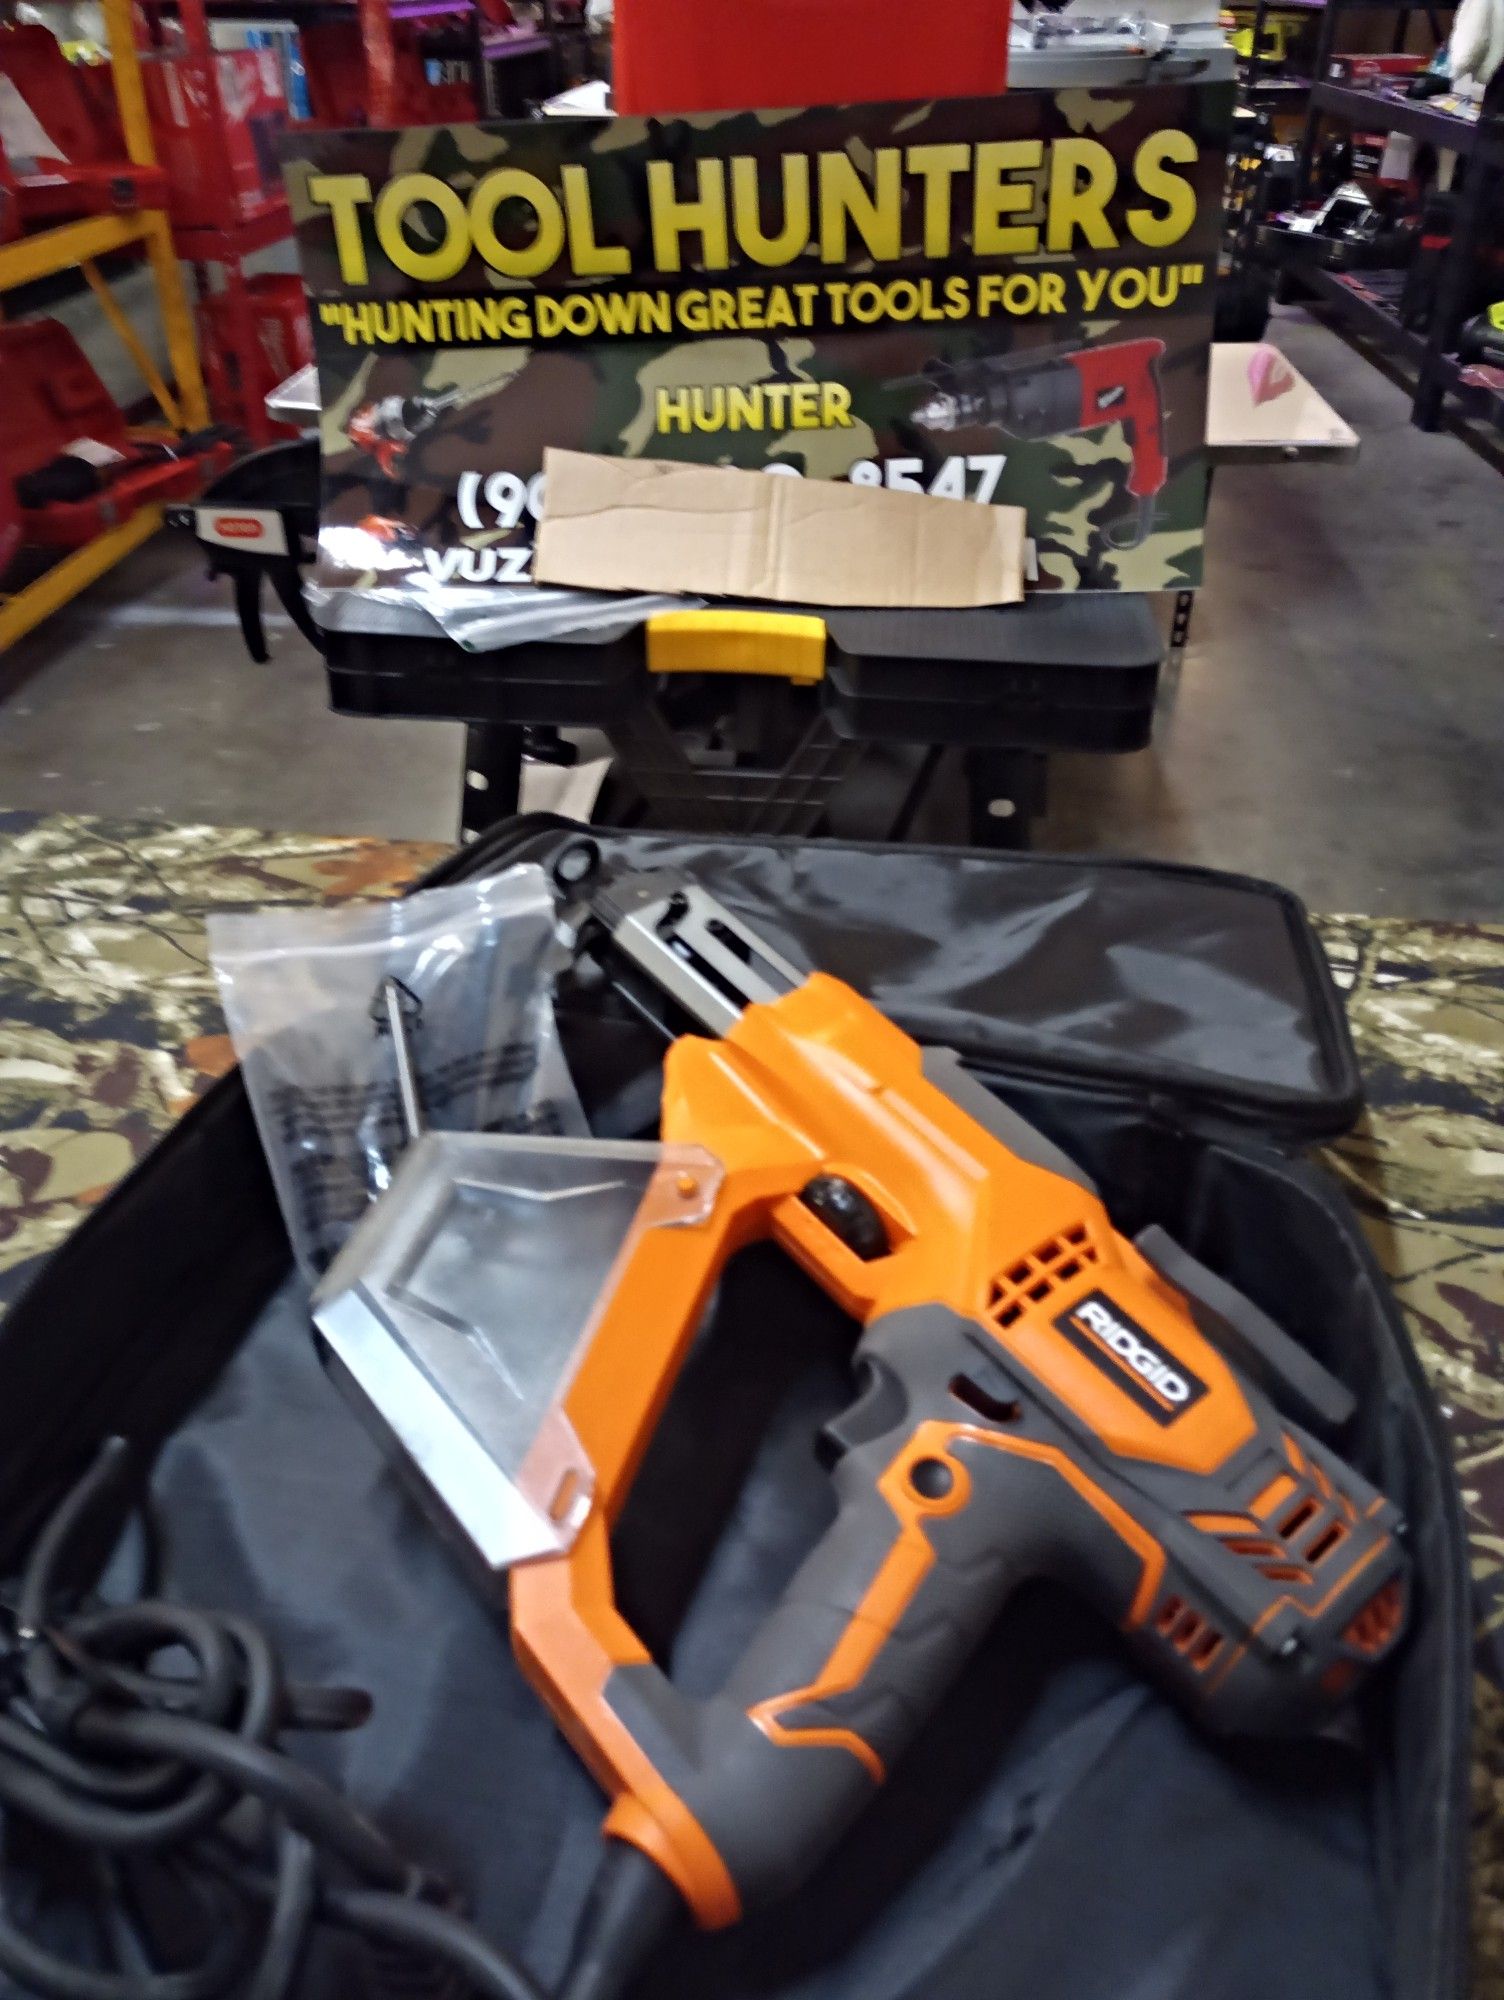 NEW RIDGID 3700 RPM COLLATED DRYWALL AND DECK SCREWGUN !! POWERFUL MOTOR TO SINK SCREWS UP TO 3"